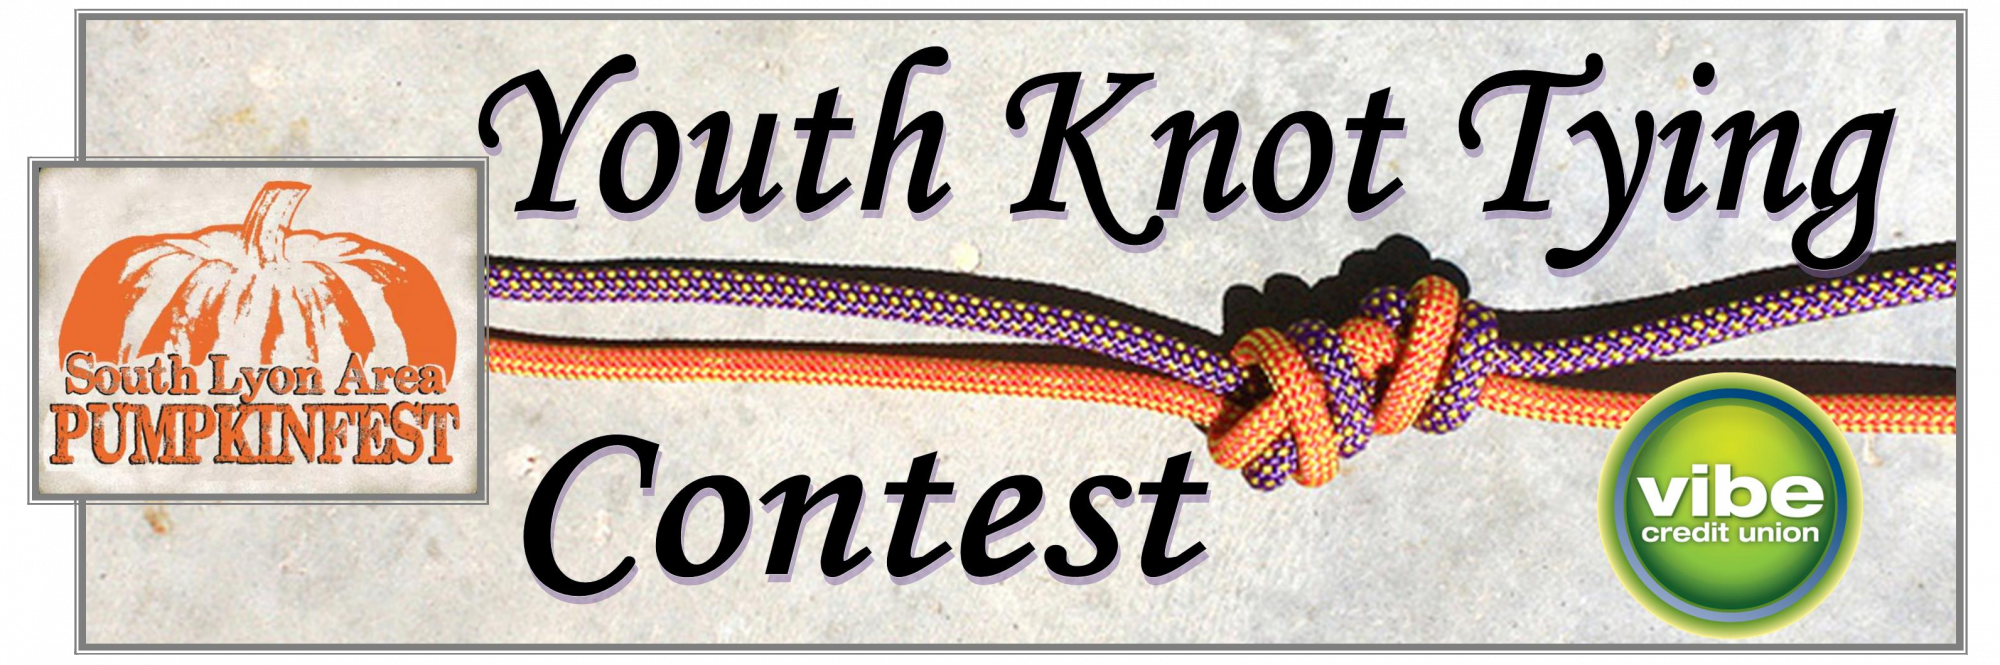 knot contest header